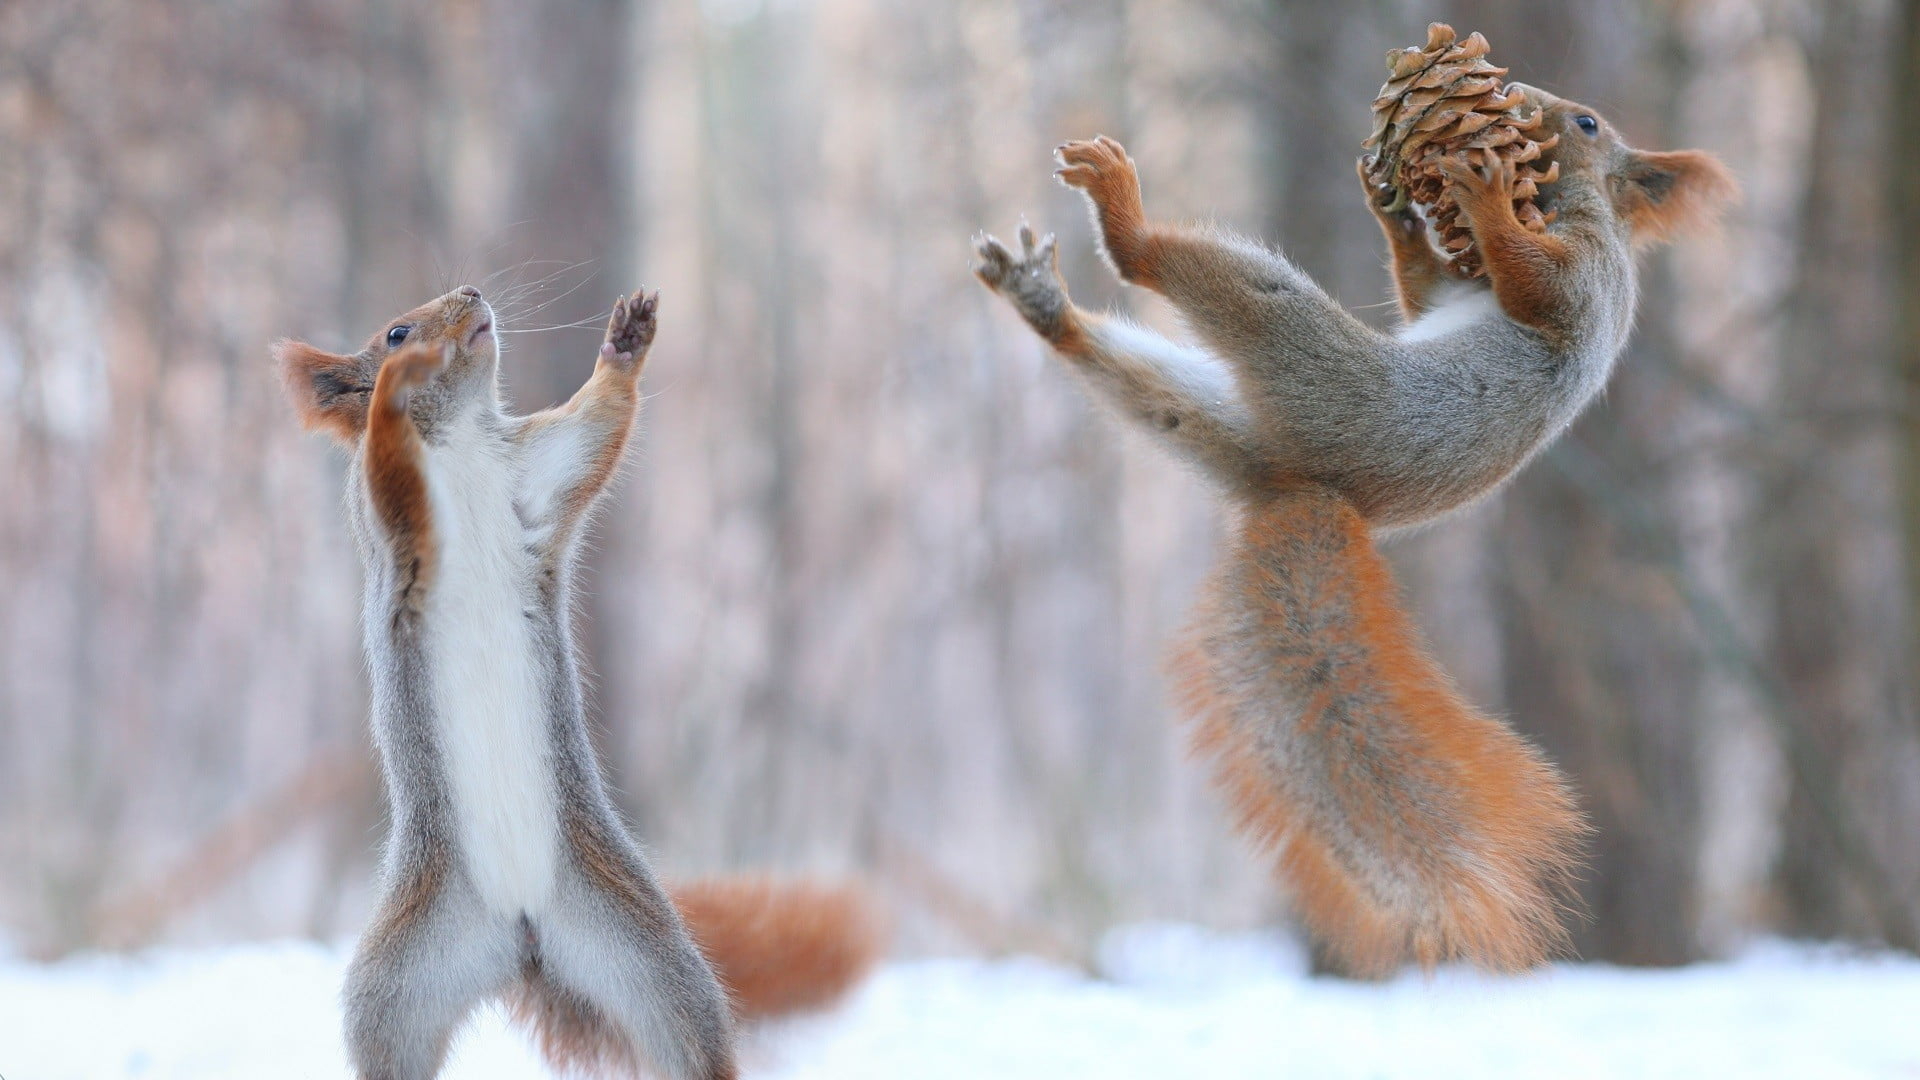 Squirrels playing